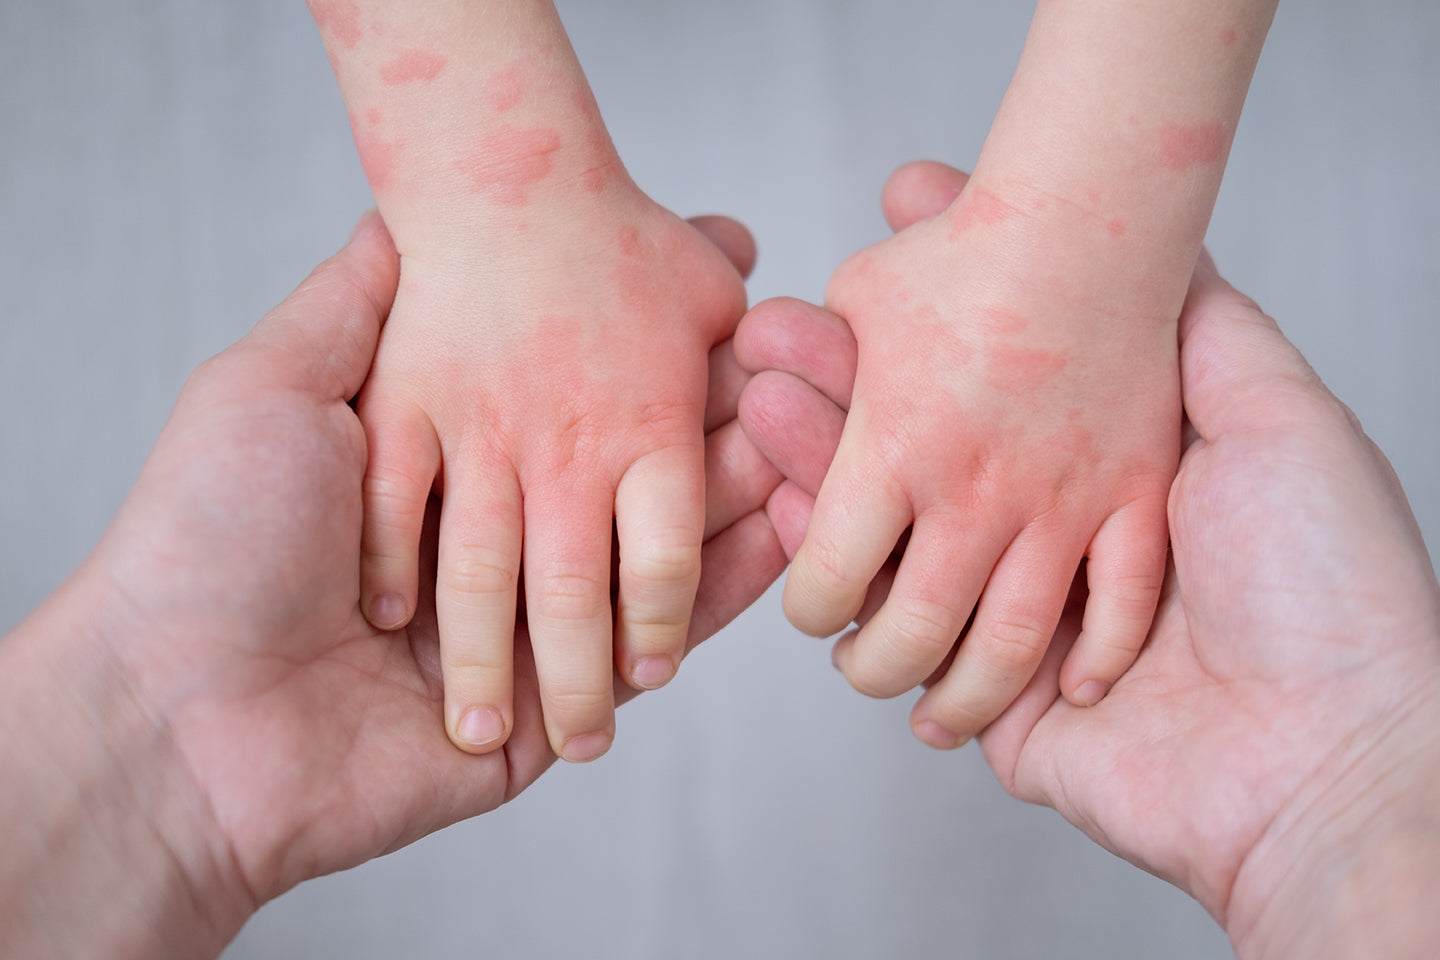 UNDERSTANDING ECZEMA: CAUSES, SYMPTOMS, AND TIPS ON HOW TO TREAT